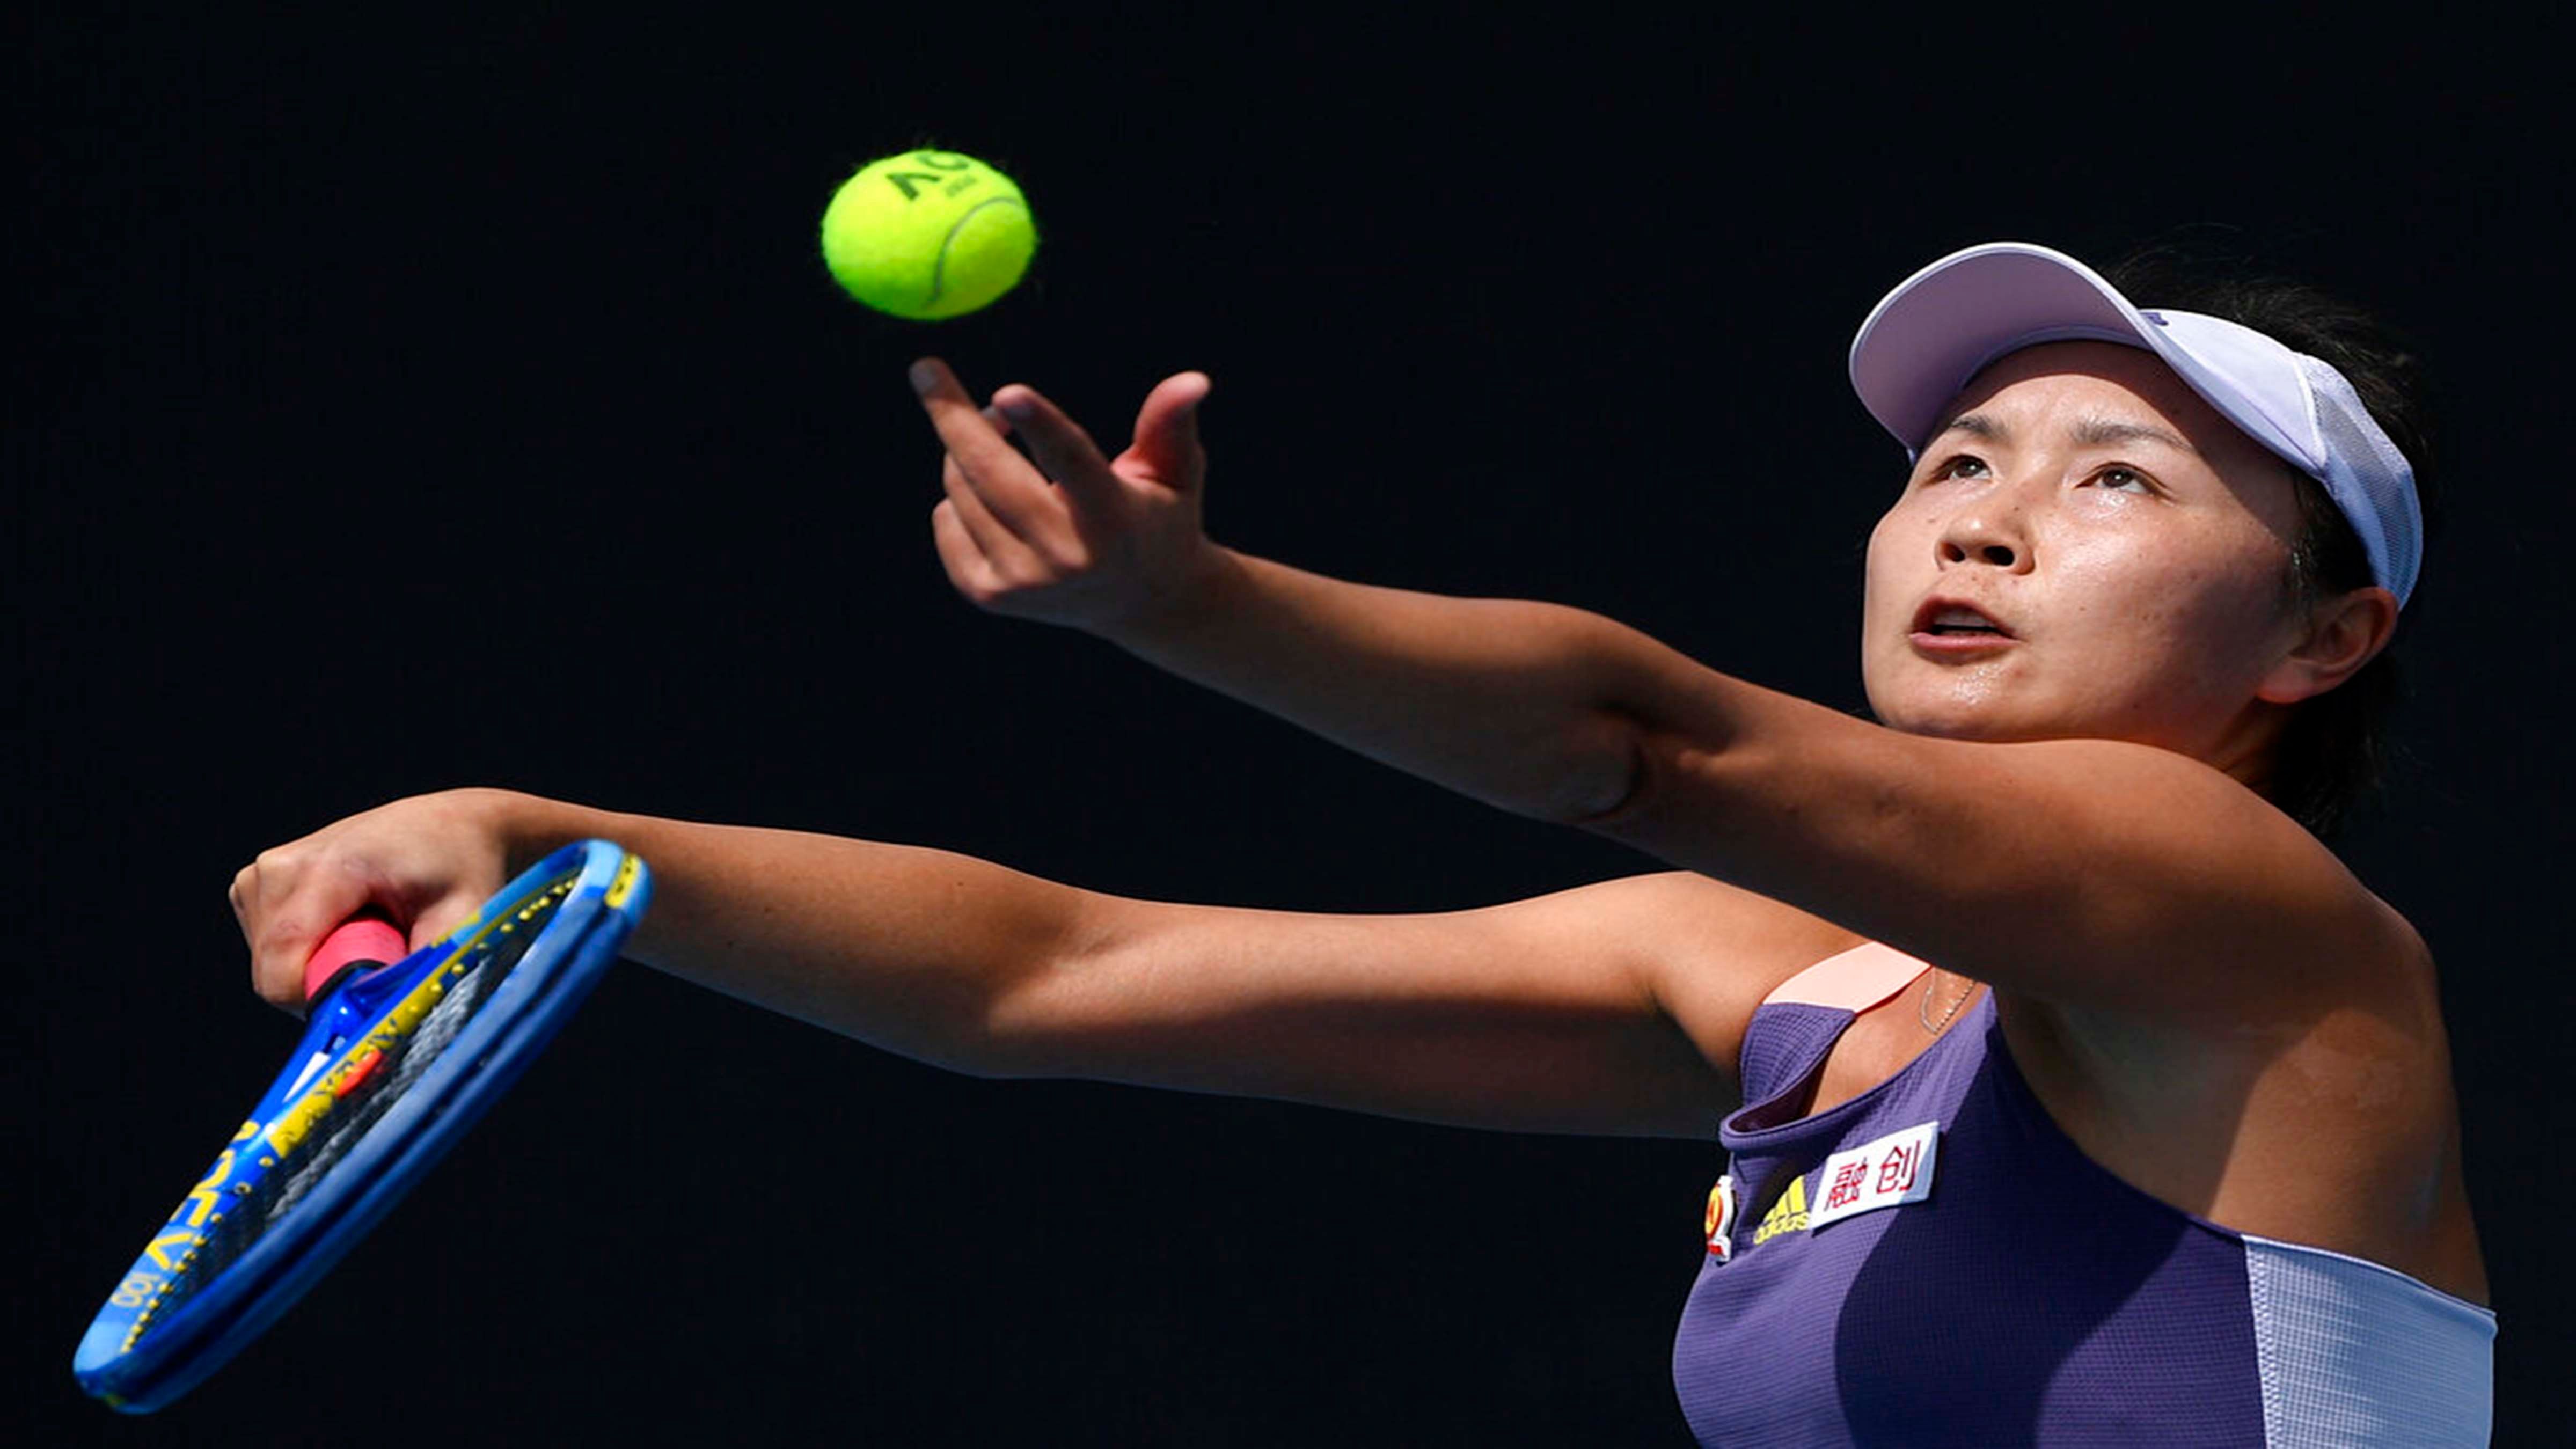 Tennis player Peng Shuai backs off from sexual assault claims photo TIME